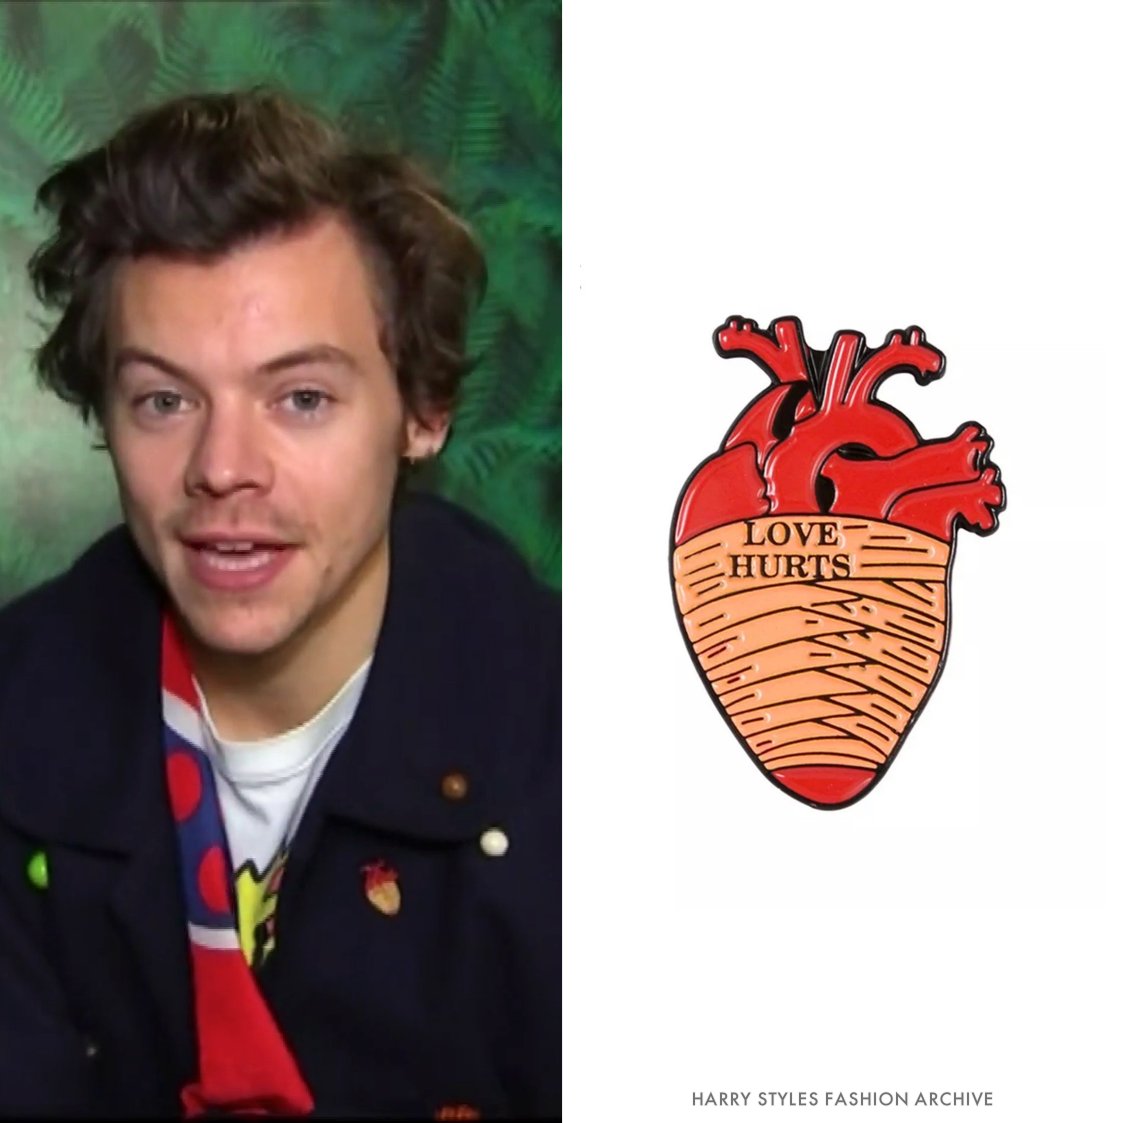 Harry Styles Fashion Archive Harry Wore A Love Hurts Anatomical Heart Pin 4 In His Pre Taped Segment For The Project T Co B28fvttdsy T Co Agb8v8vs3j